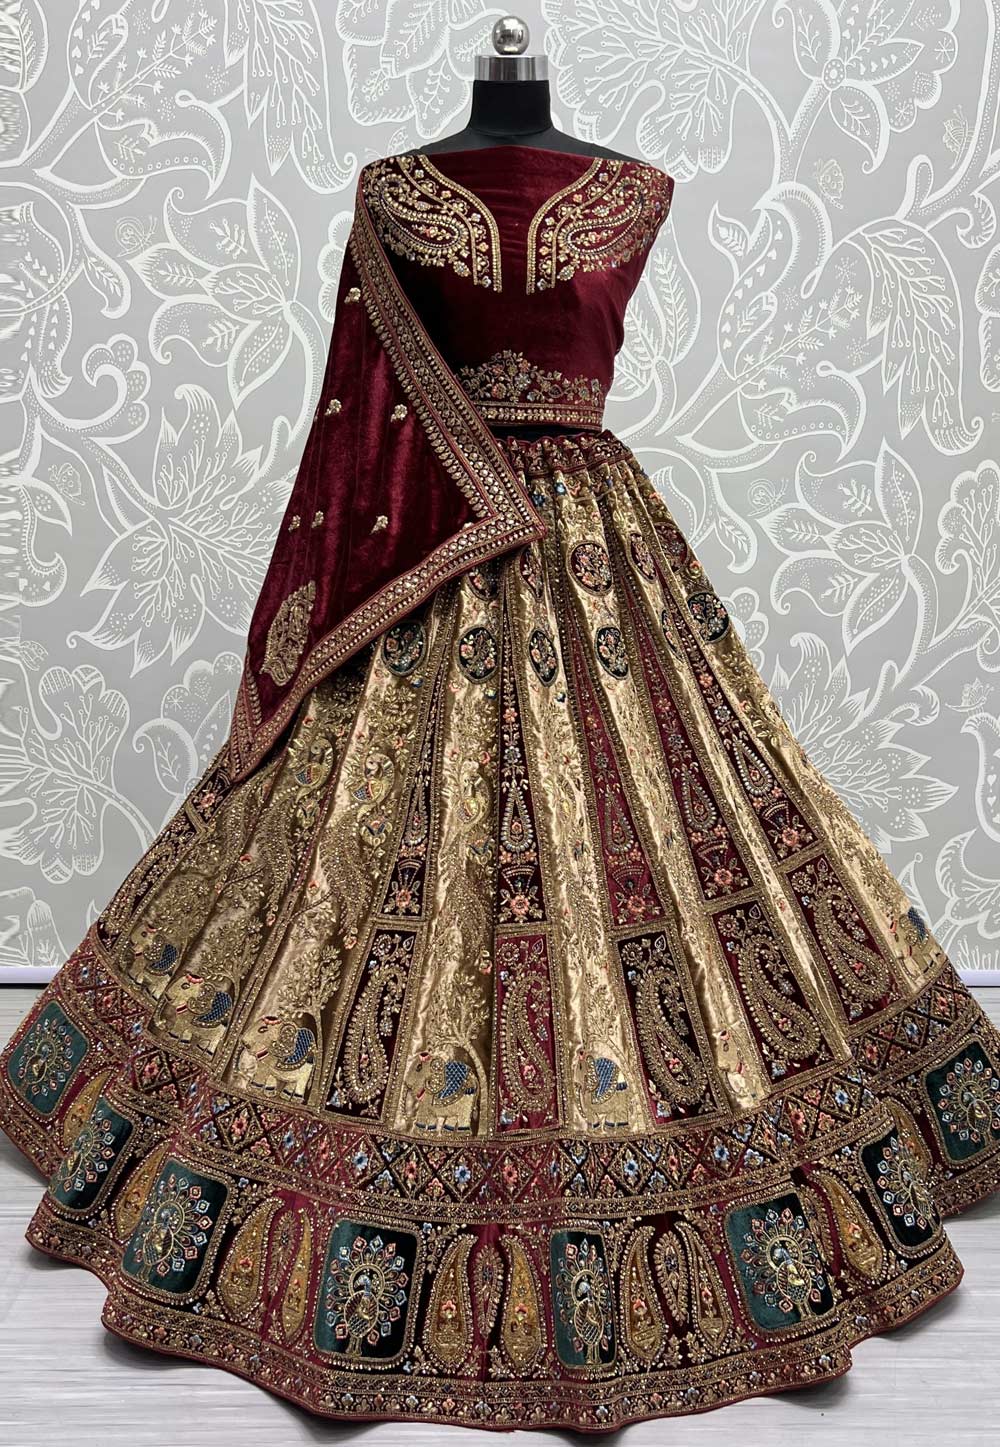 Buy Viral Fashion Golden Color Lehenga Choli with Contrast Dupatta (Golden)  at Amazon.in